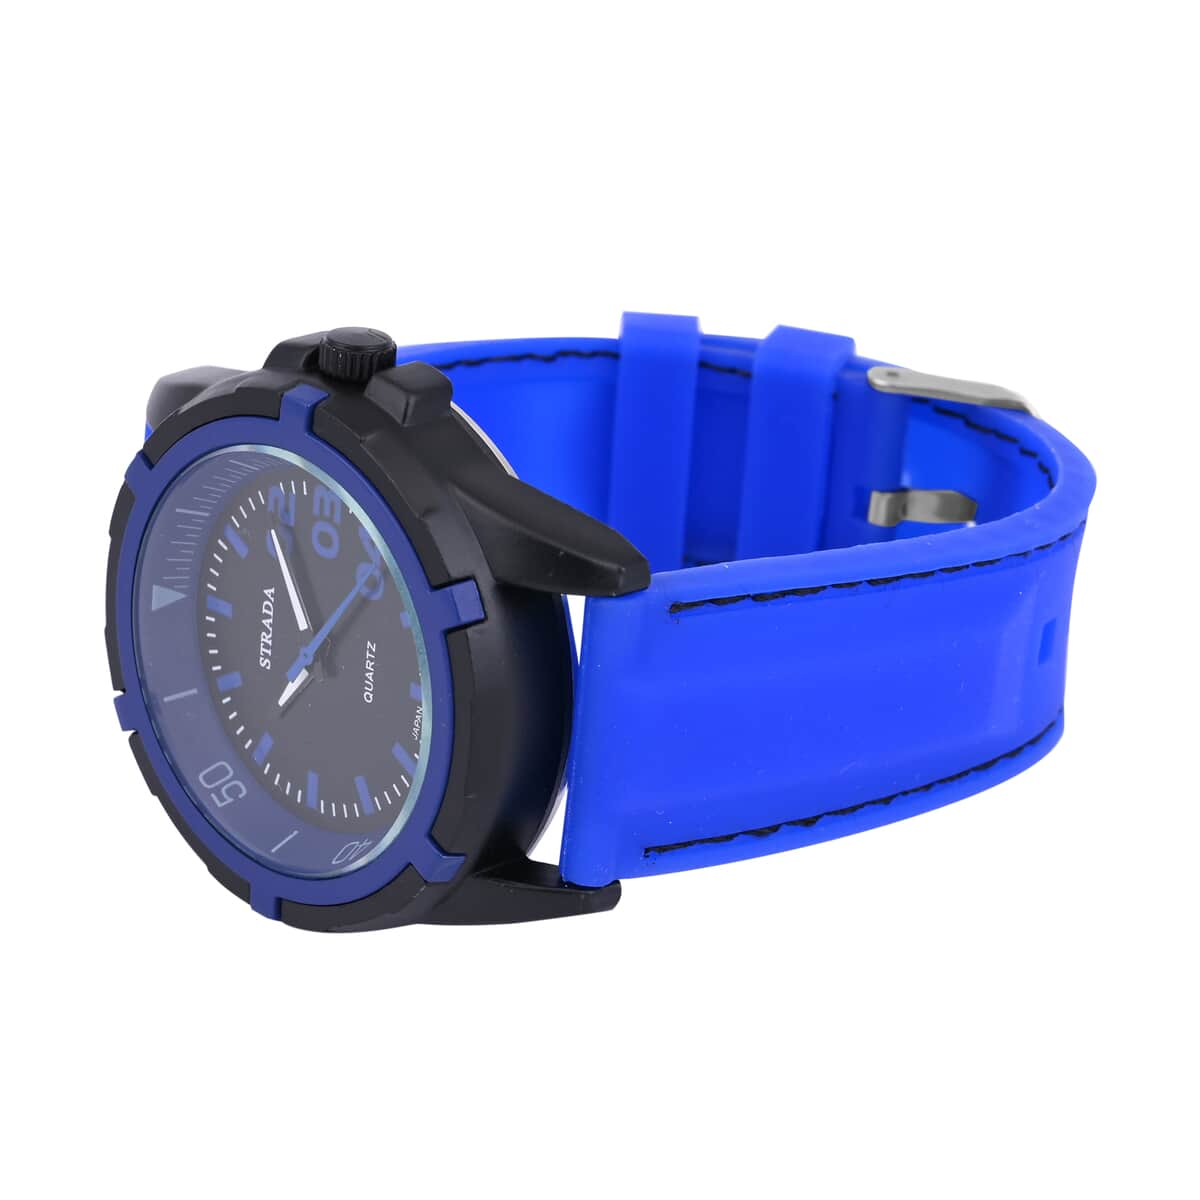 Strada Japanese Movement Sports Watch with Blue Silicone Strap image number 4